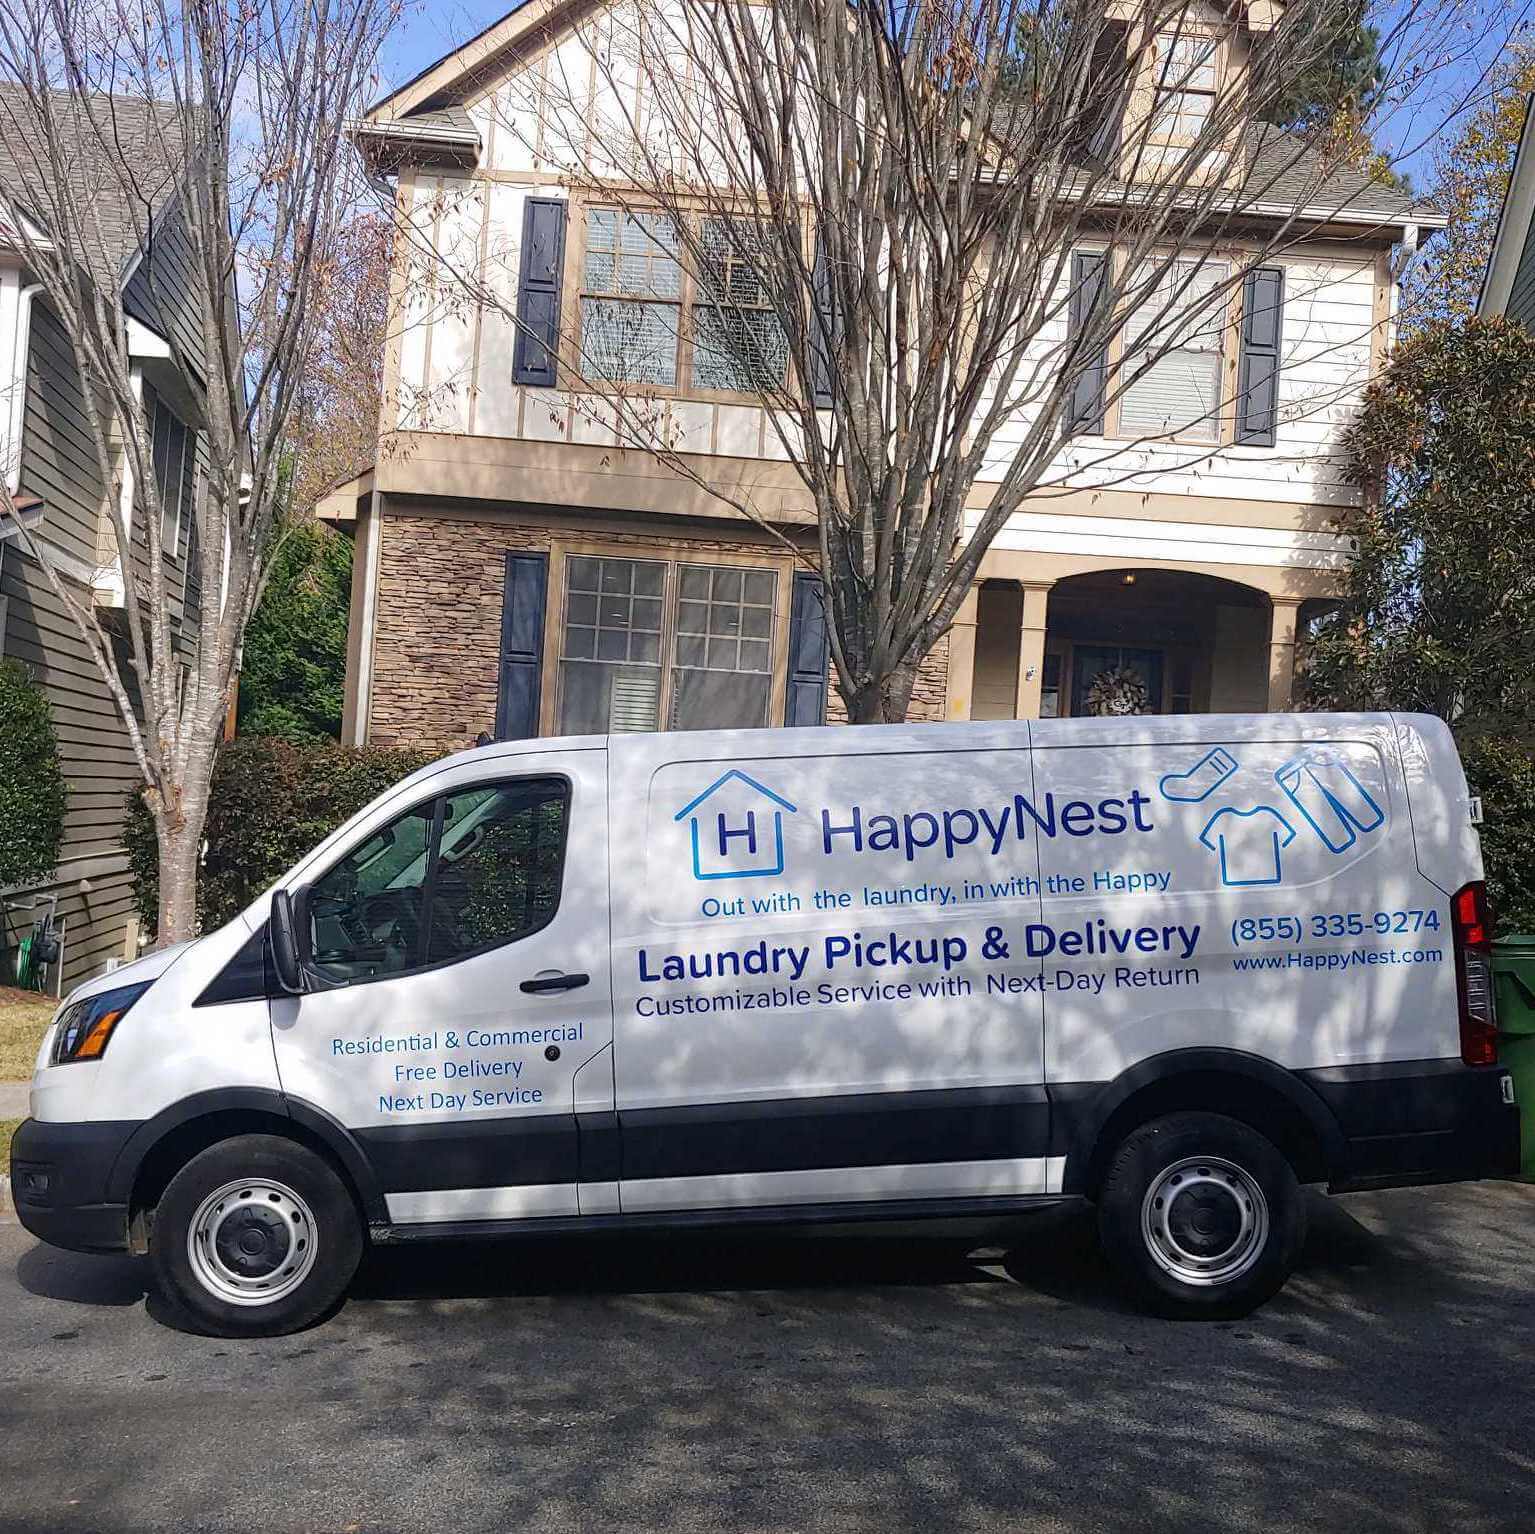 HappyNest Laundry Service is now serving the Greater Boston Area!